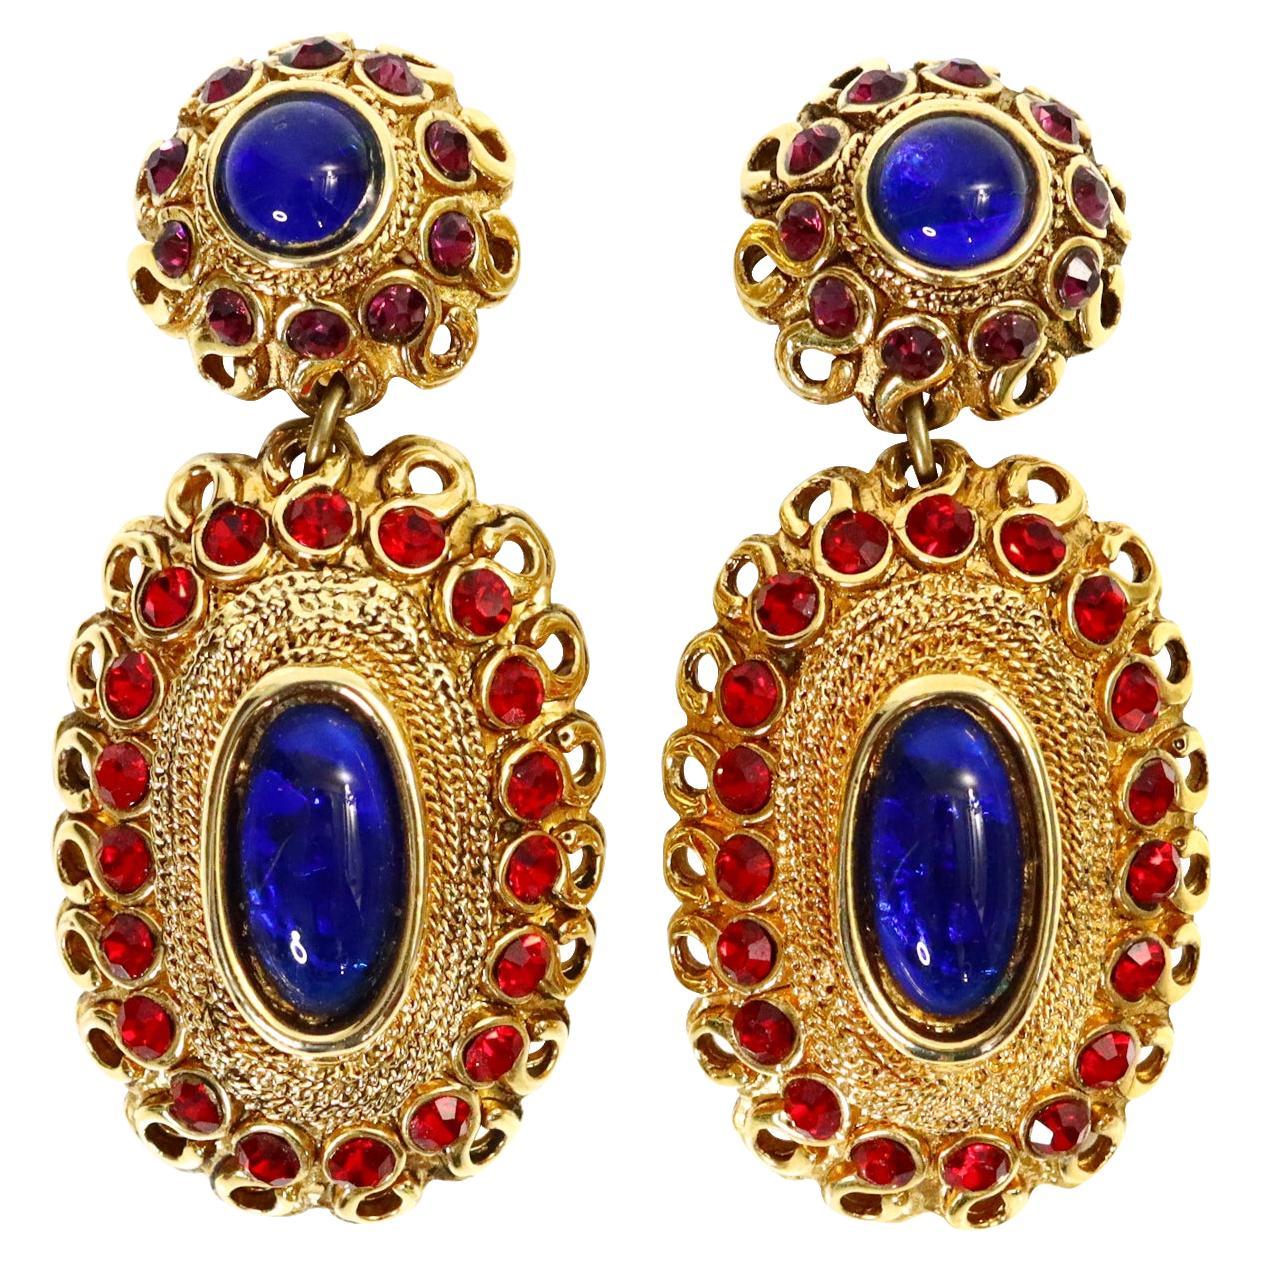 Vintage Gold Tone Chain Tassel Earrings Blue Red Cluster Cabochon Stones Pierced